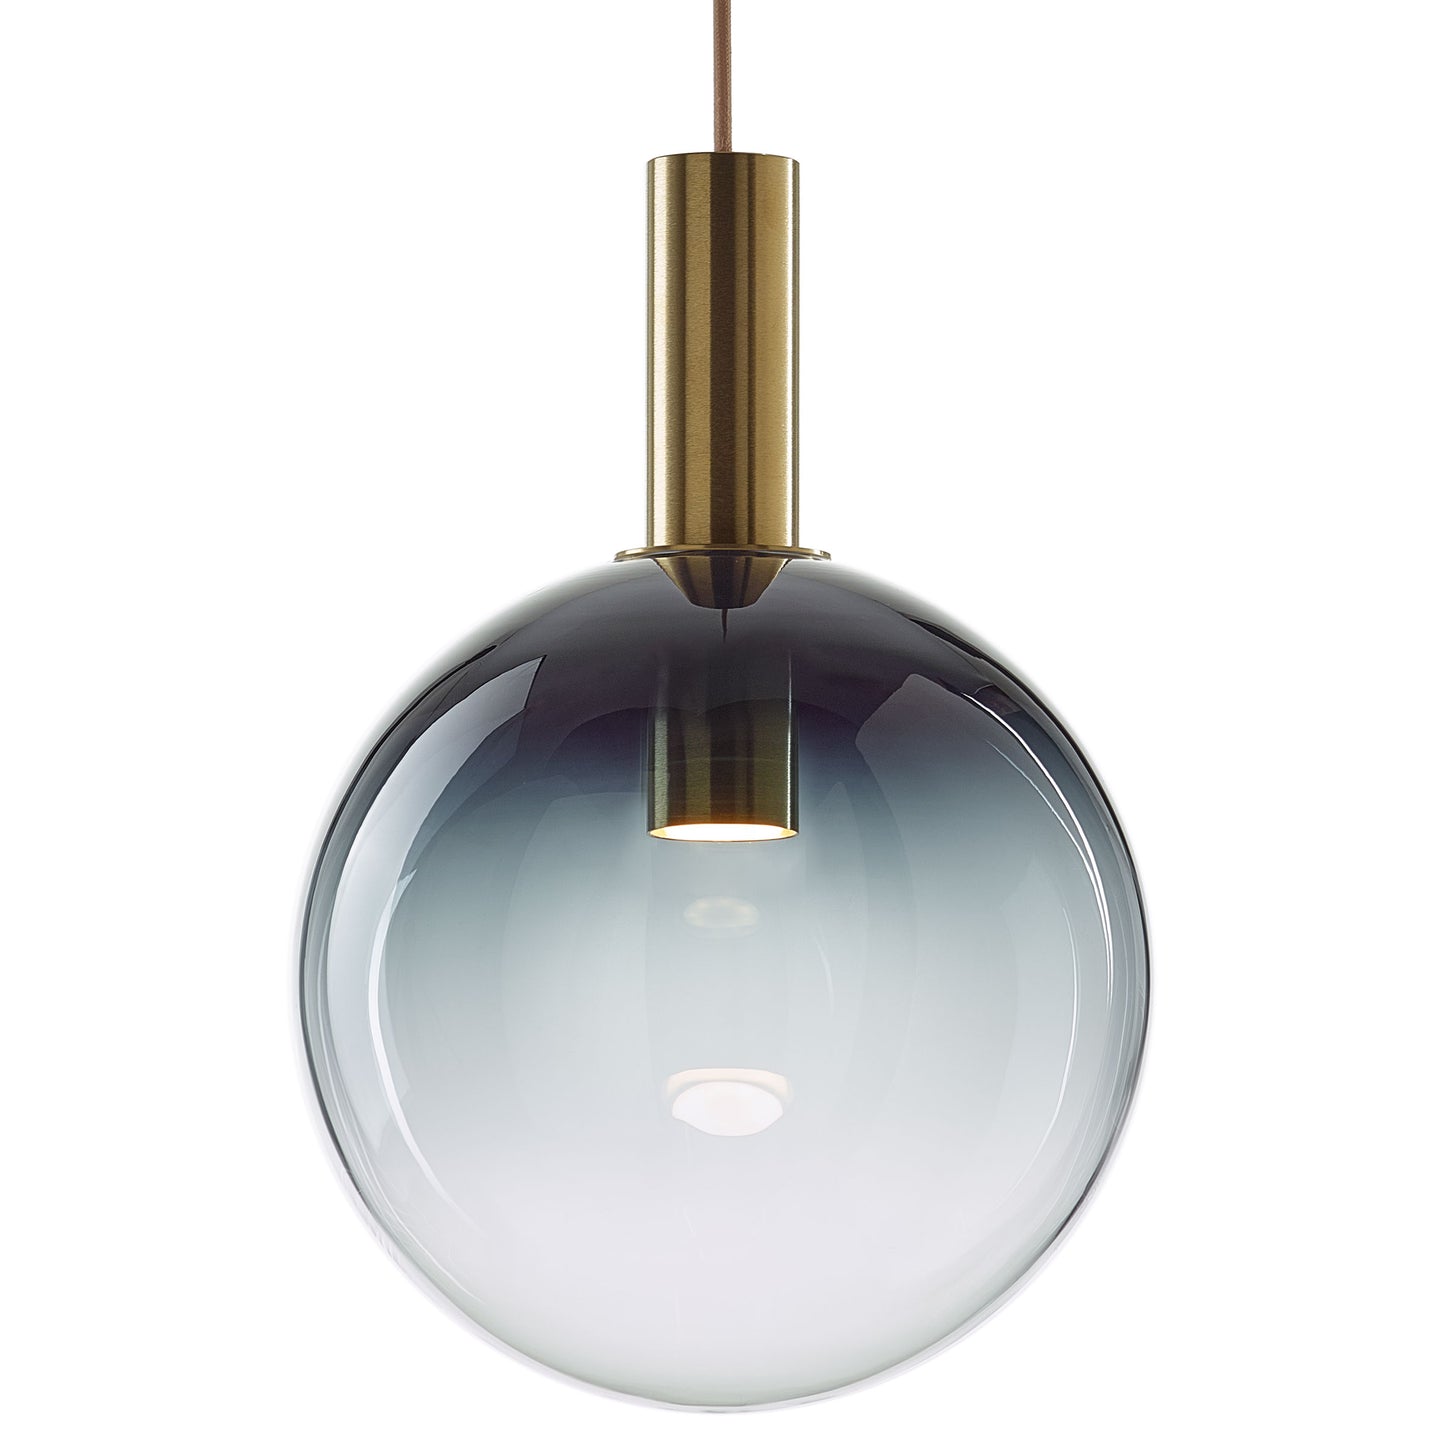 BOMMA - DIVINA PENDANT - from $3,880.00